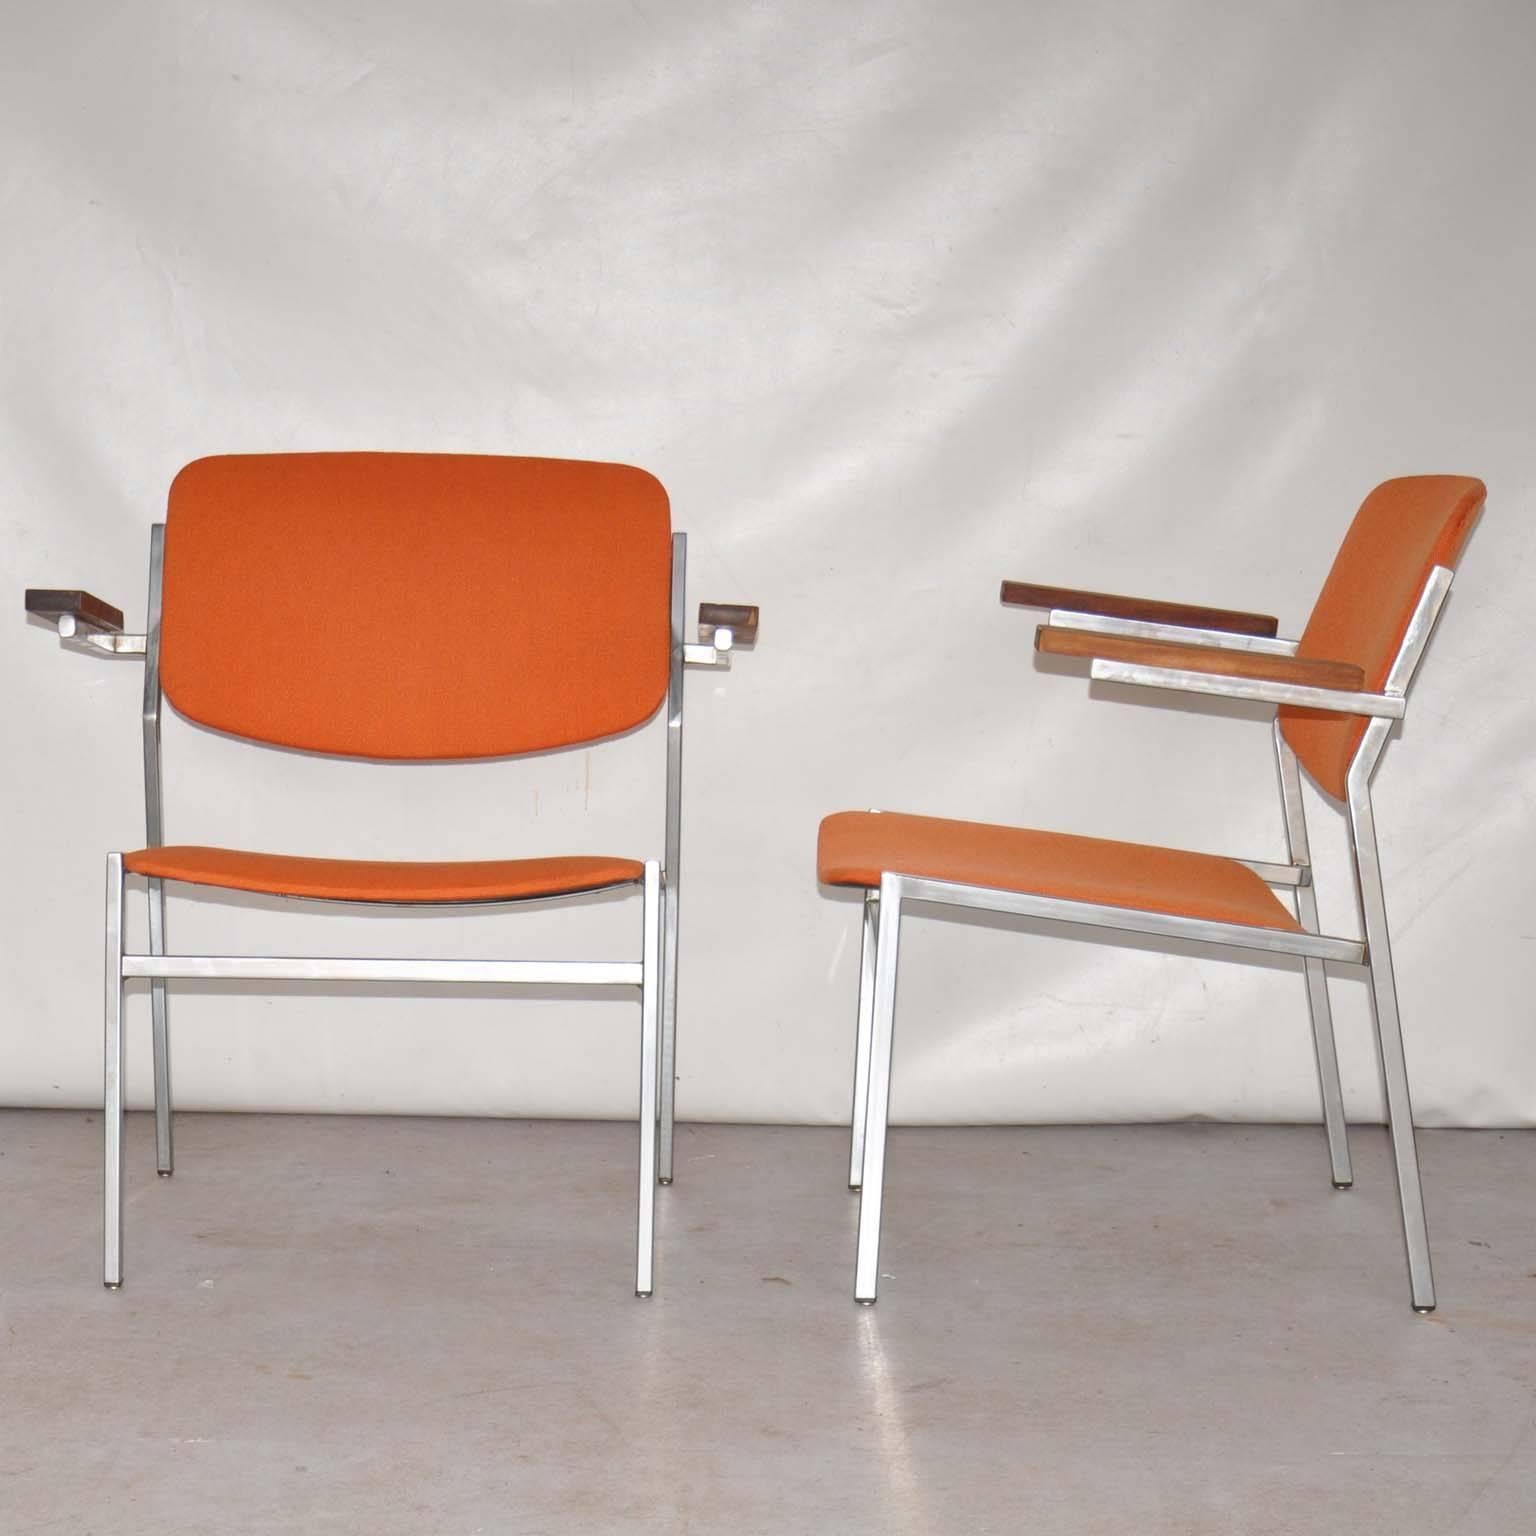 Metal lounge chairs with wooden armrests. Orange upholstery is in good condition.
Attributed to Martin Visser.